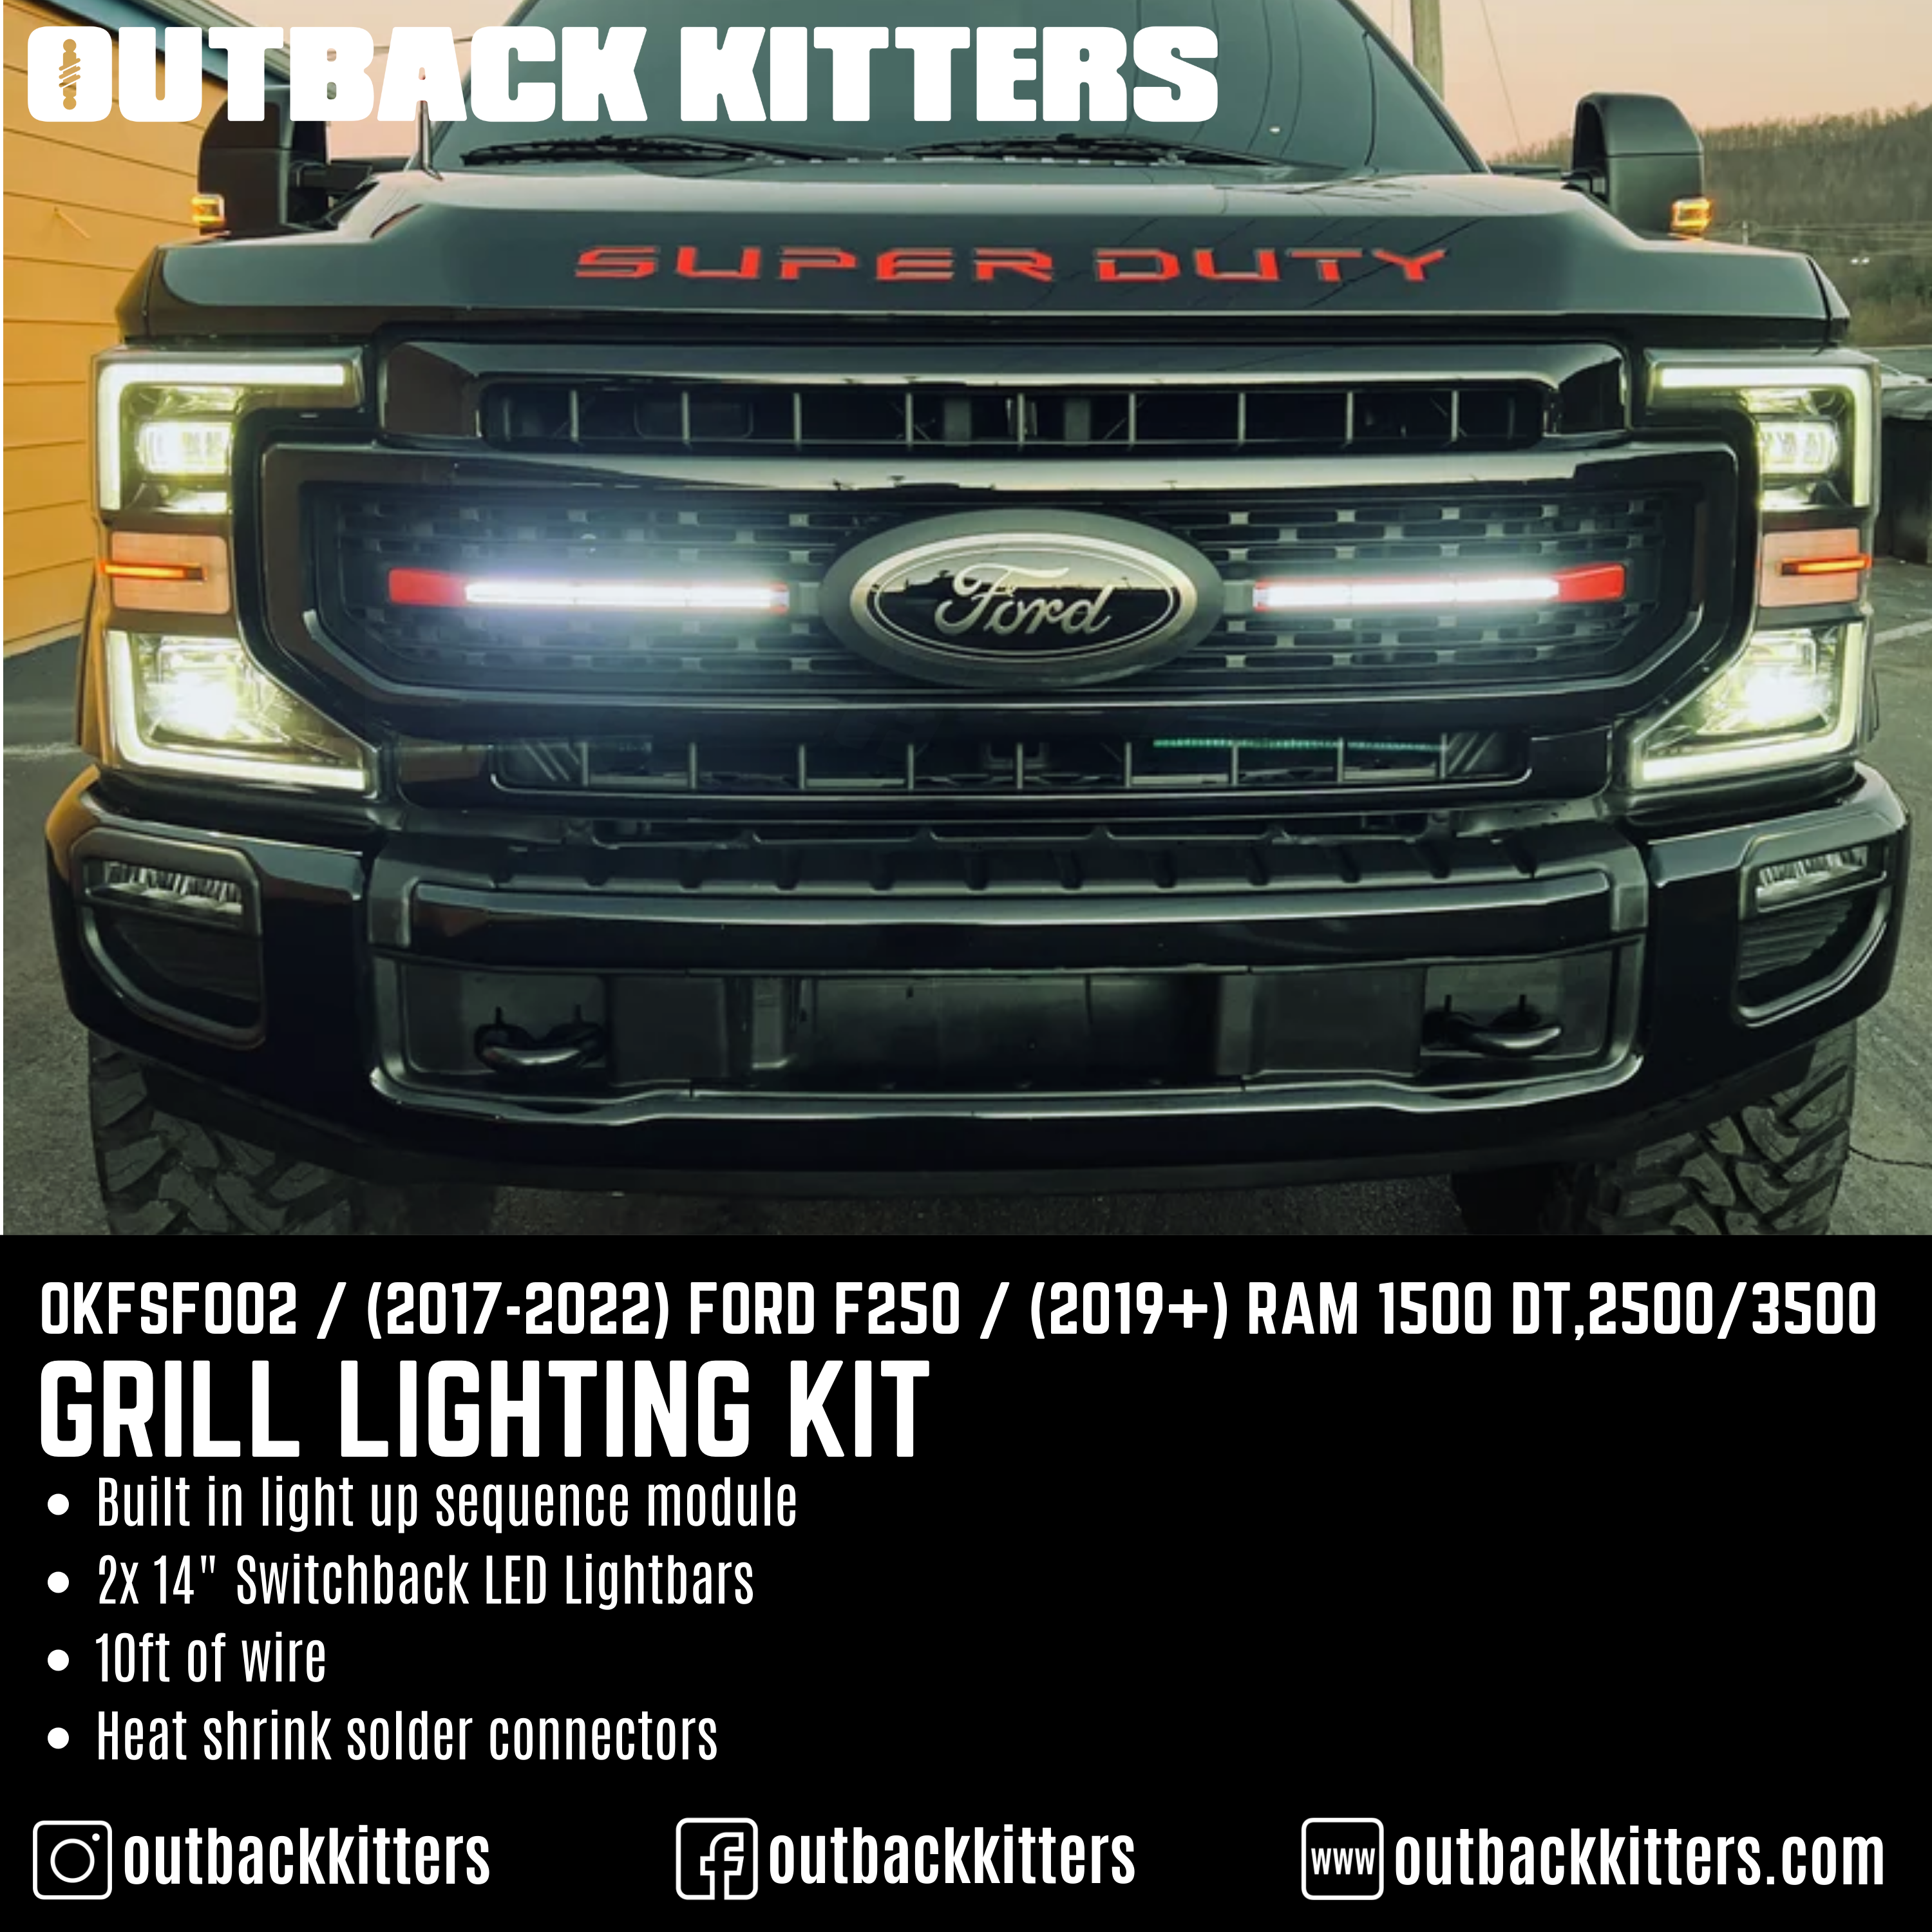 Grille Lighting Kit - 2 x 14" LEDs for Ford F250 / Ram 2500 - Outback Kitters